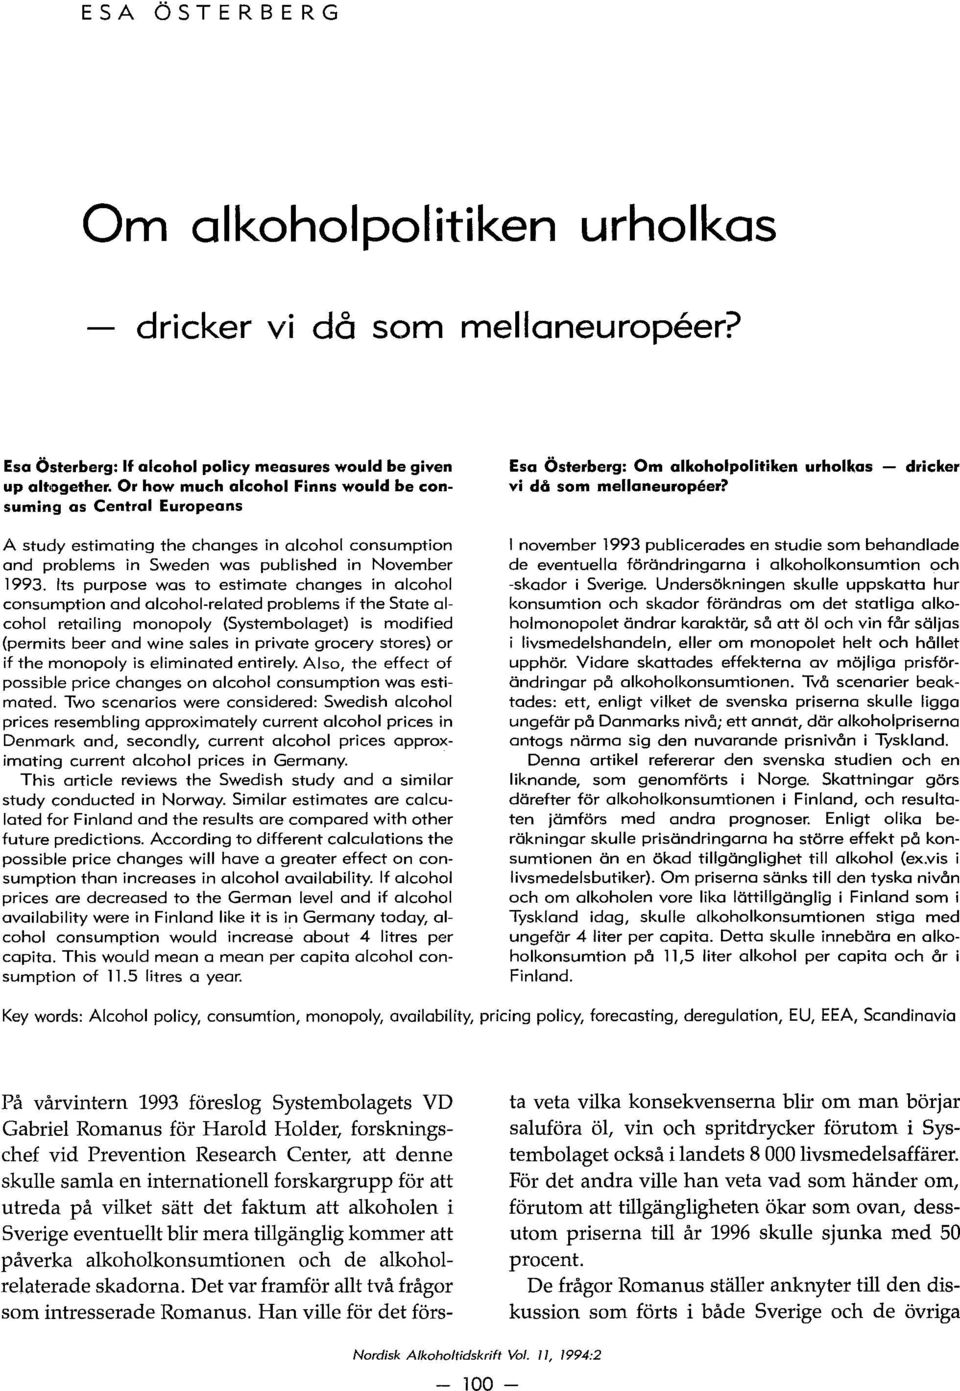 drieker A study estimating the changes in alcohol consumption and problems in Sweden was published in November 1993.